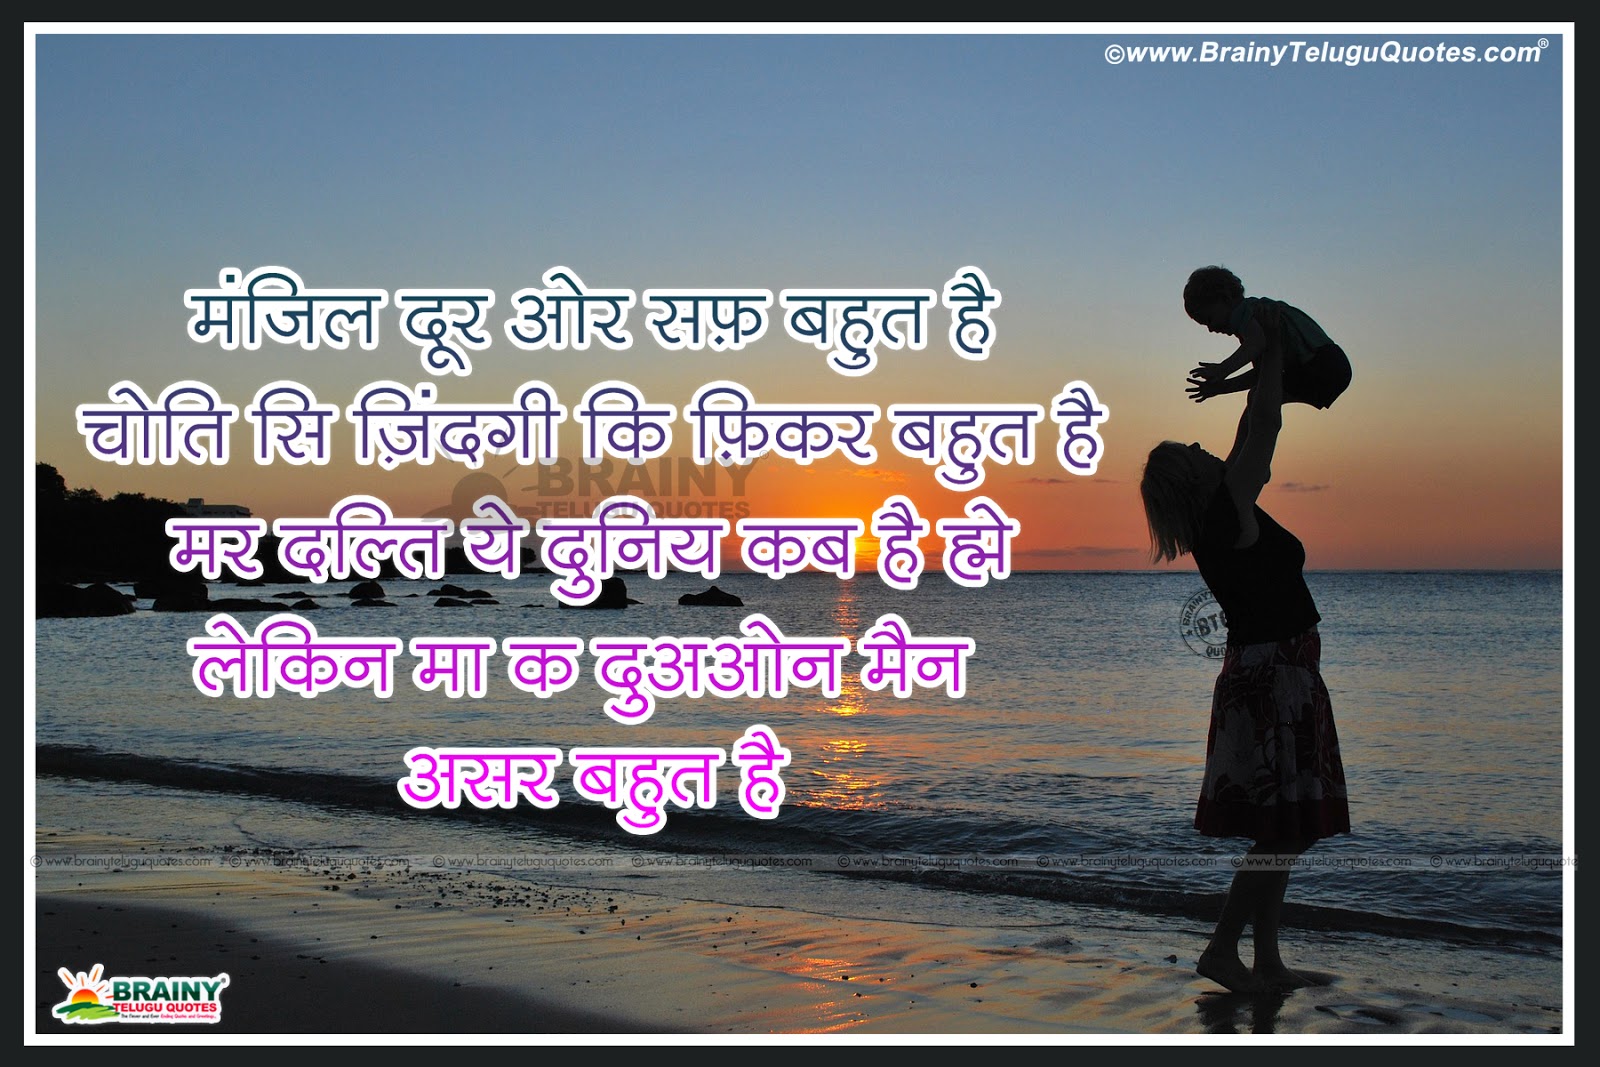 Heart Touching Some Best Lines shayari quotes on Mother in